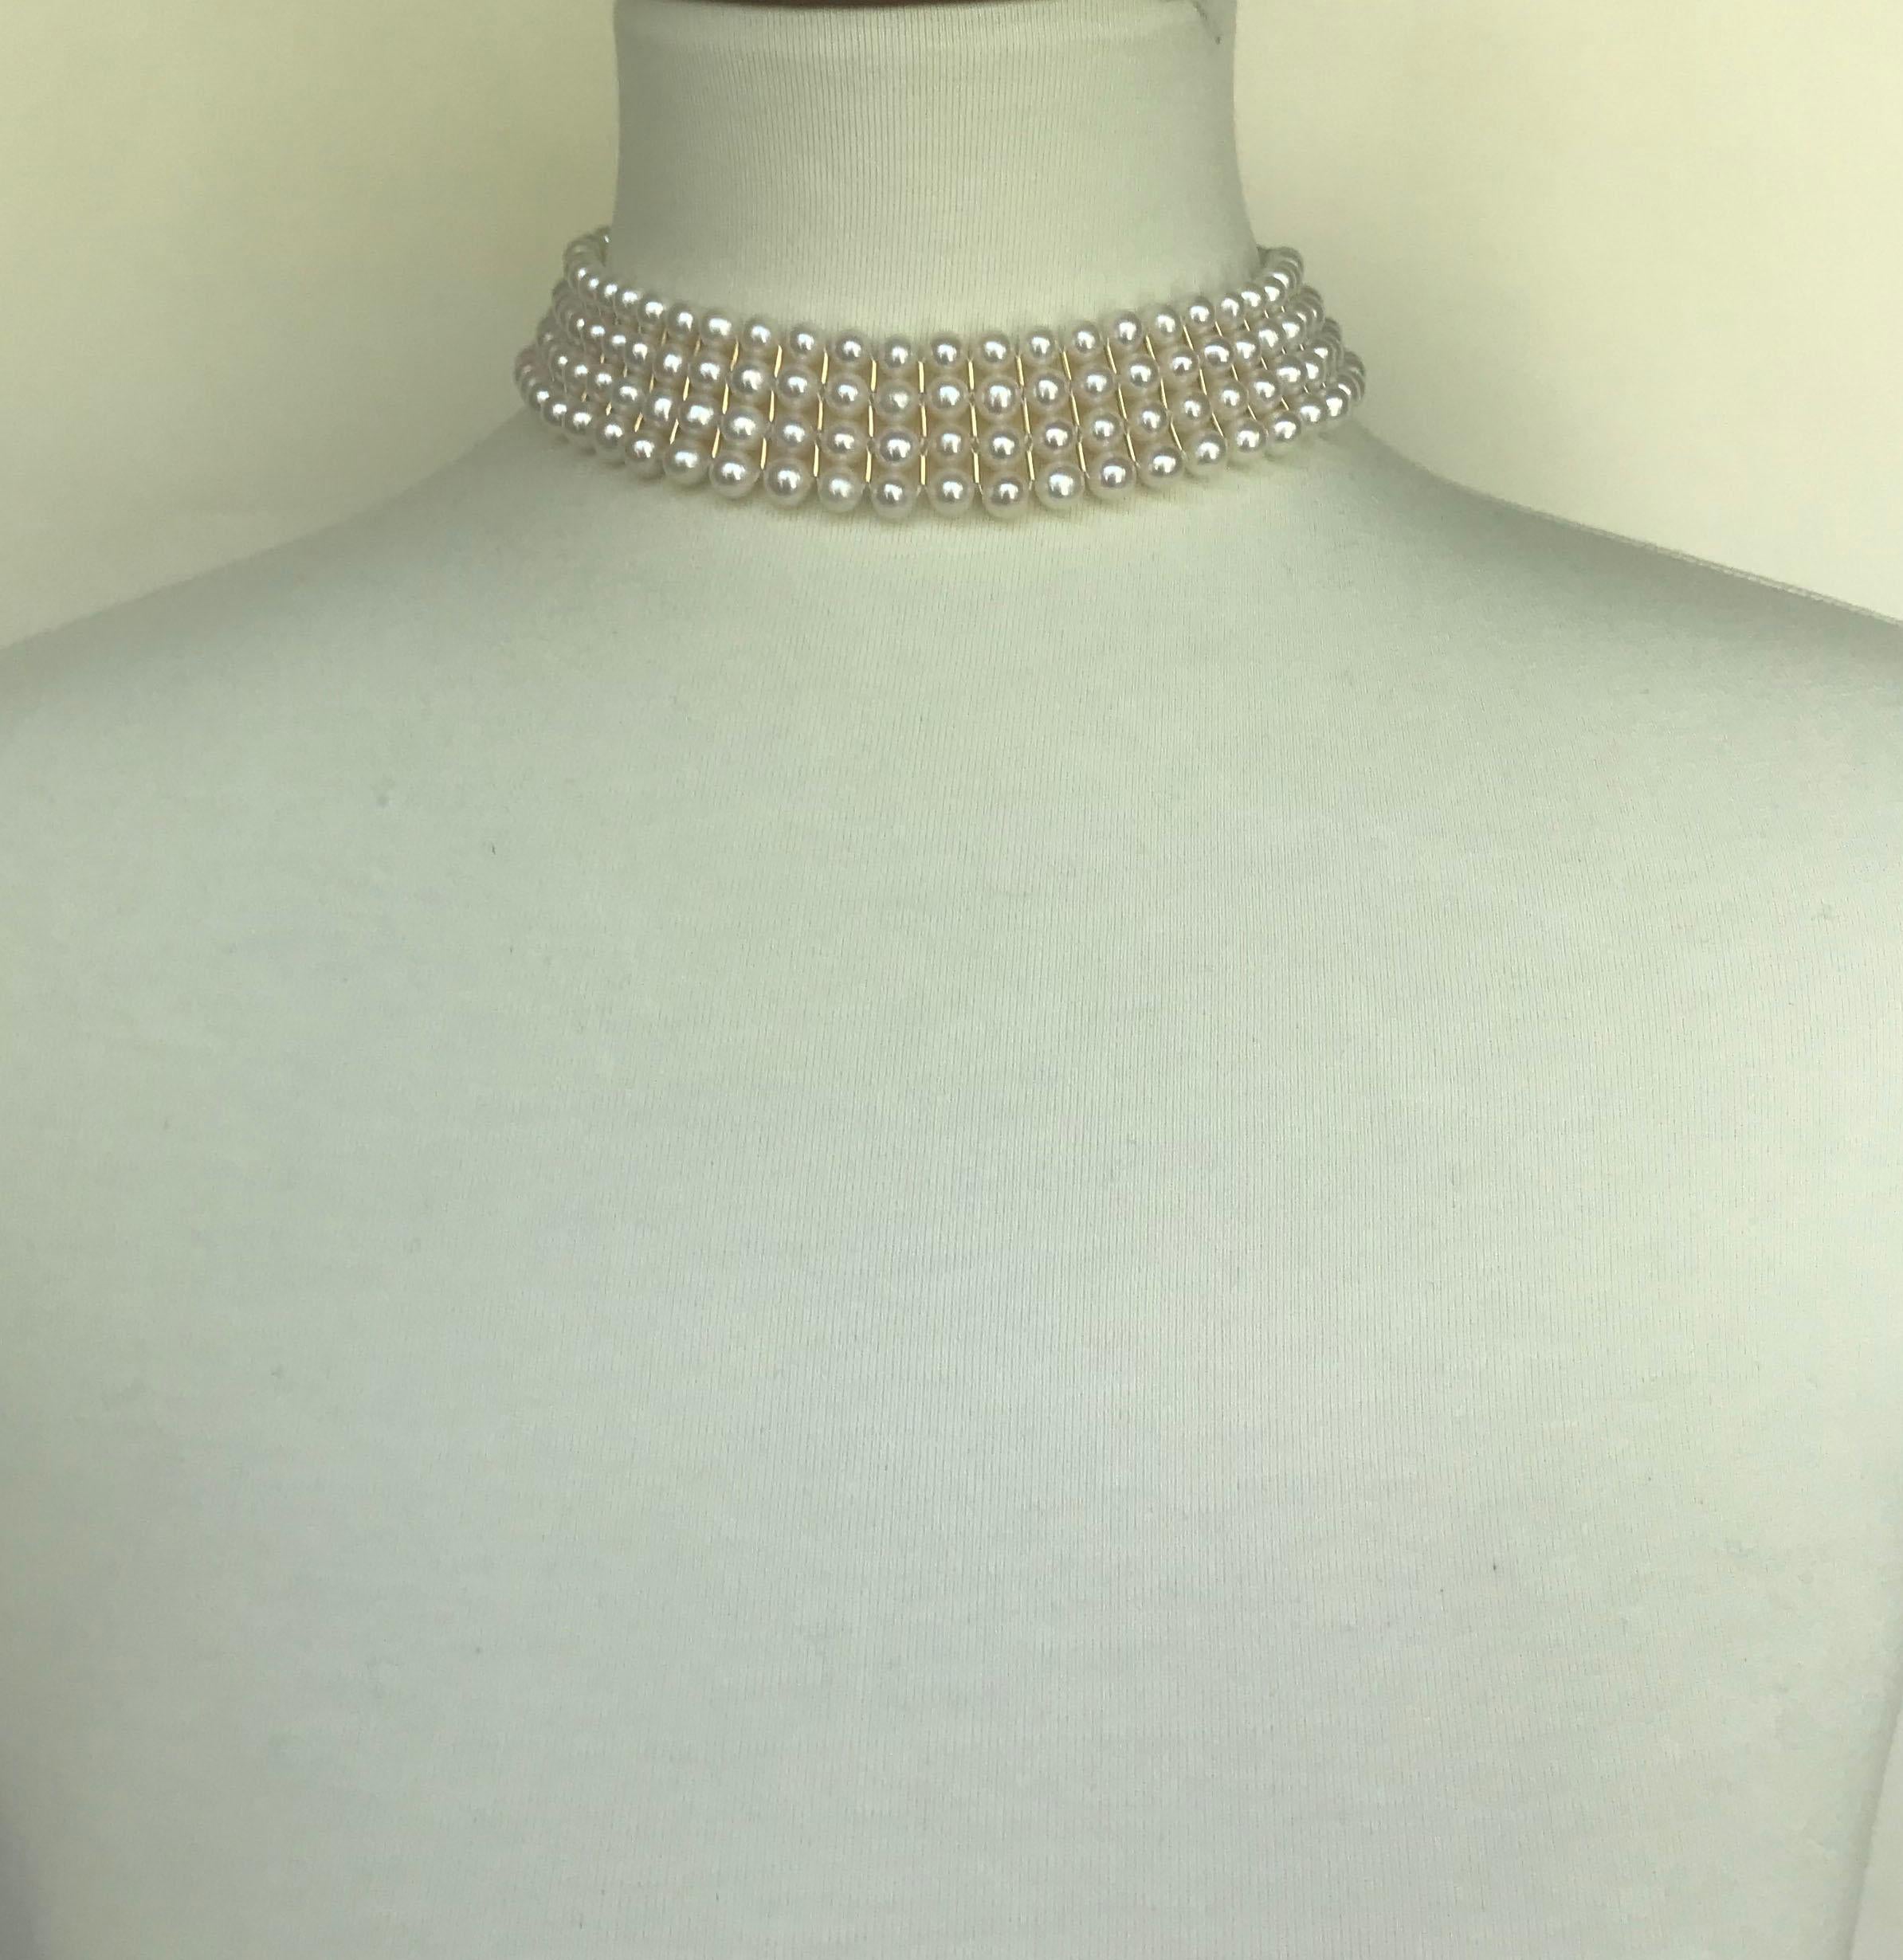 Marina J Bridal Woven White Pearl Choker with secure sliding clasp 10